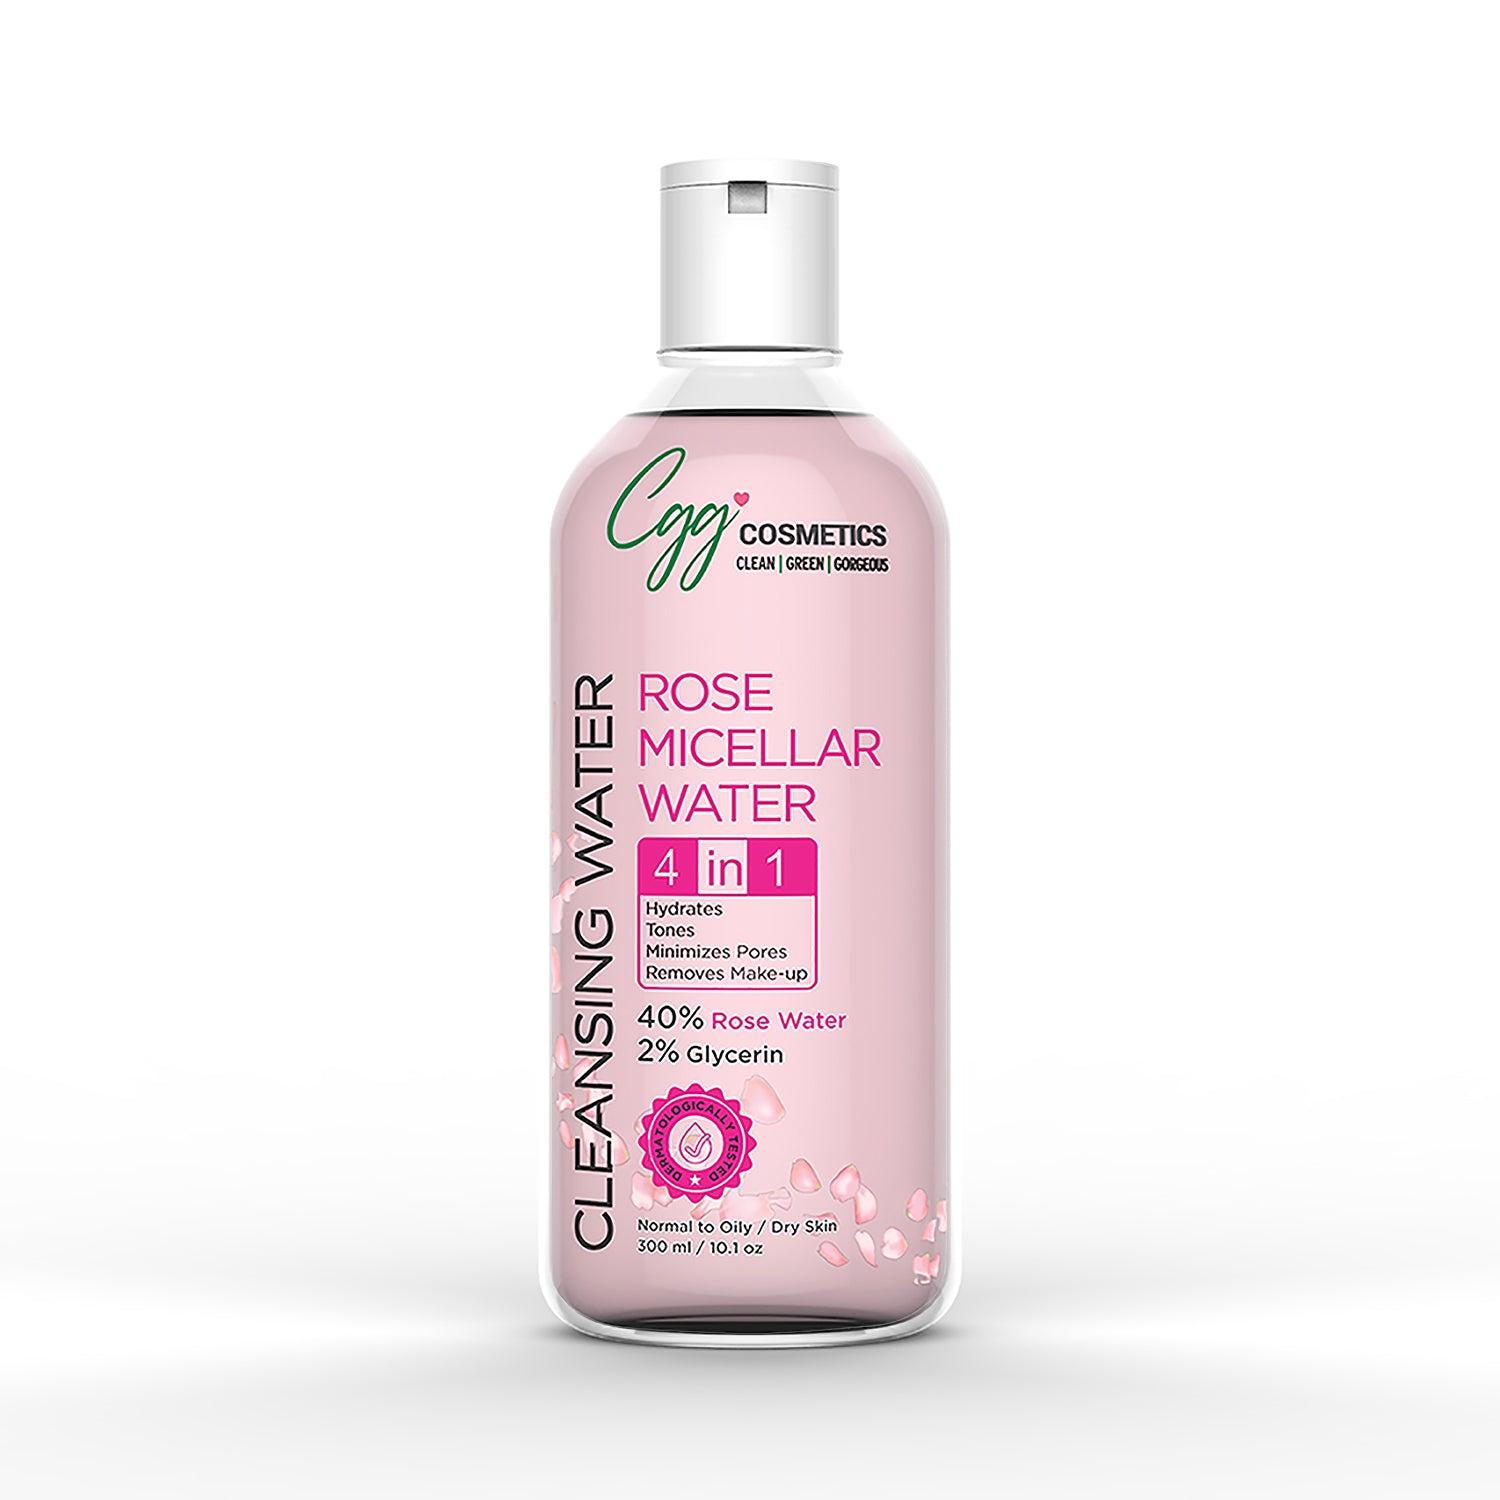 CGG Cosmetics Rose Water Micellar Cleansing Water | 4 in 1 Skin Hydrates, Removes Makeup, Cleanse & Minimizing Pores - 300ml